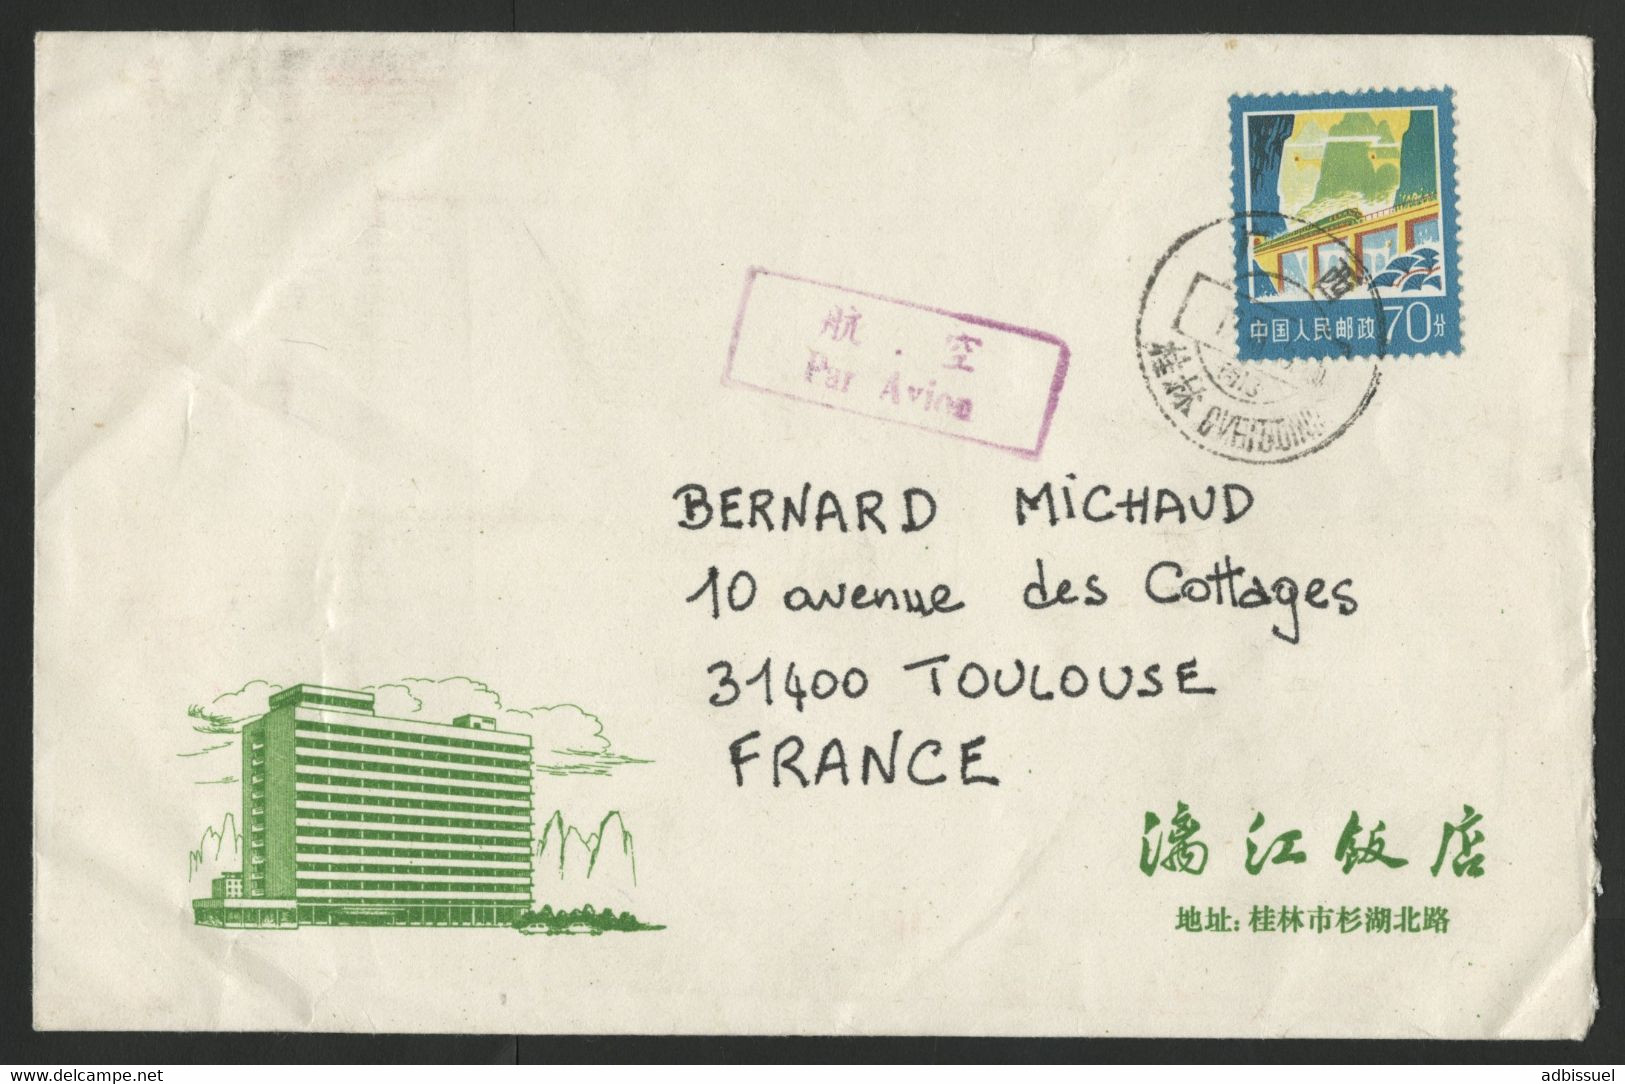 CHINA N° 2072 "Bridge / Viaduc" On An Illustrated Envelope By Airmail To France. - Briefe U. Dokumente